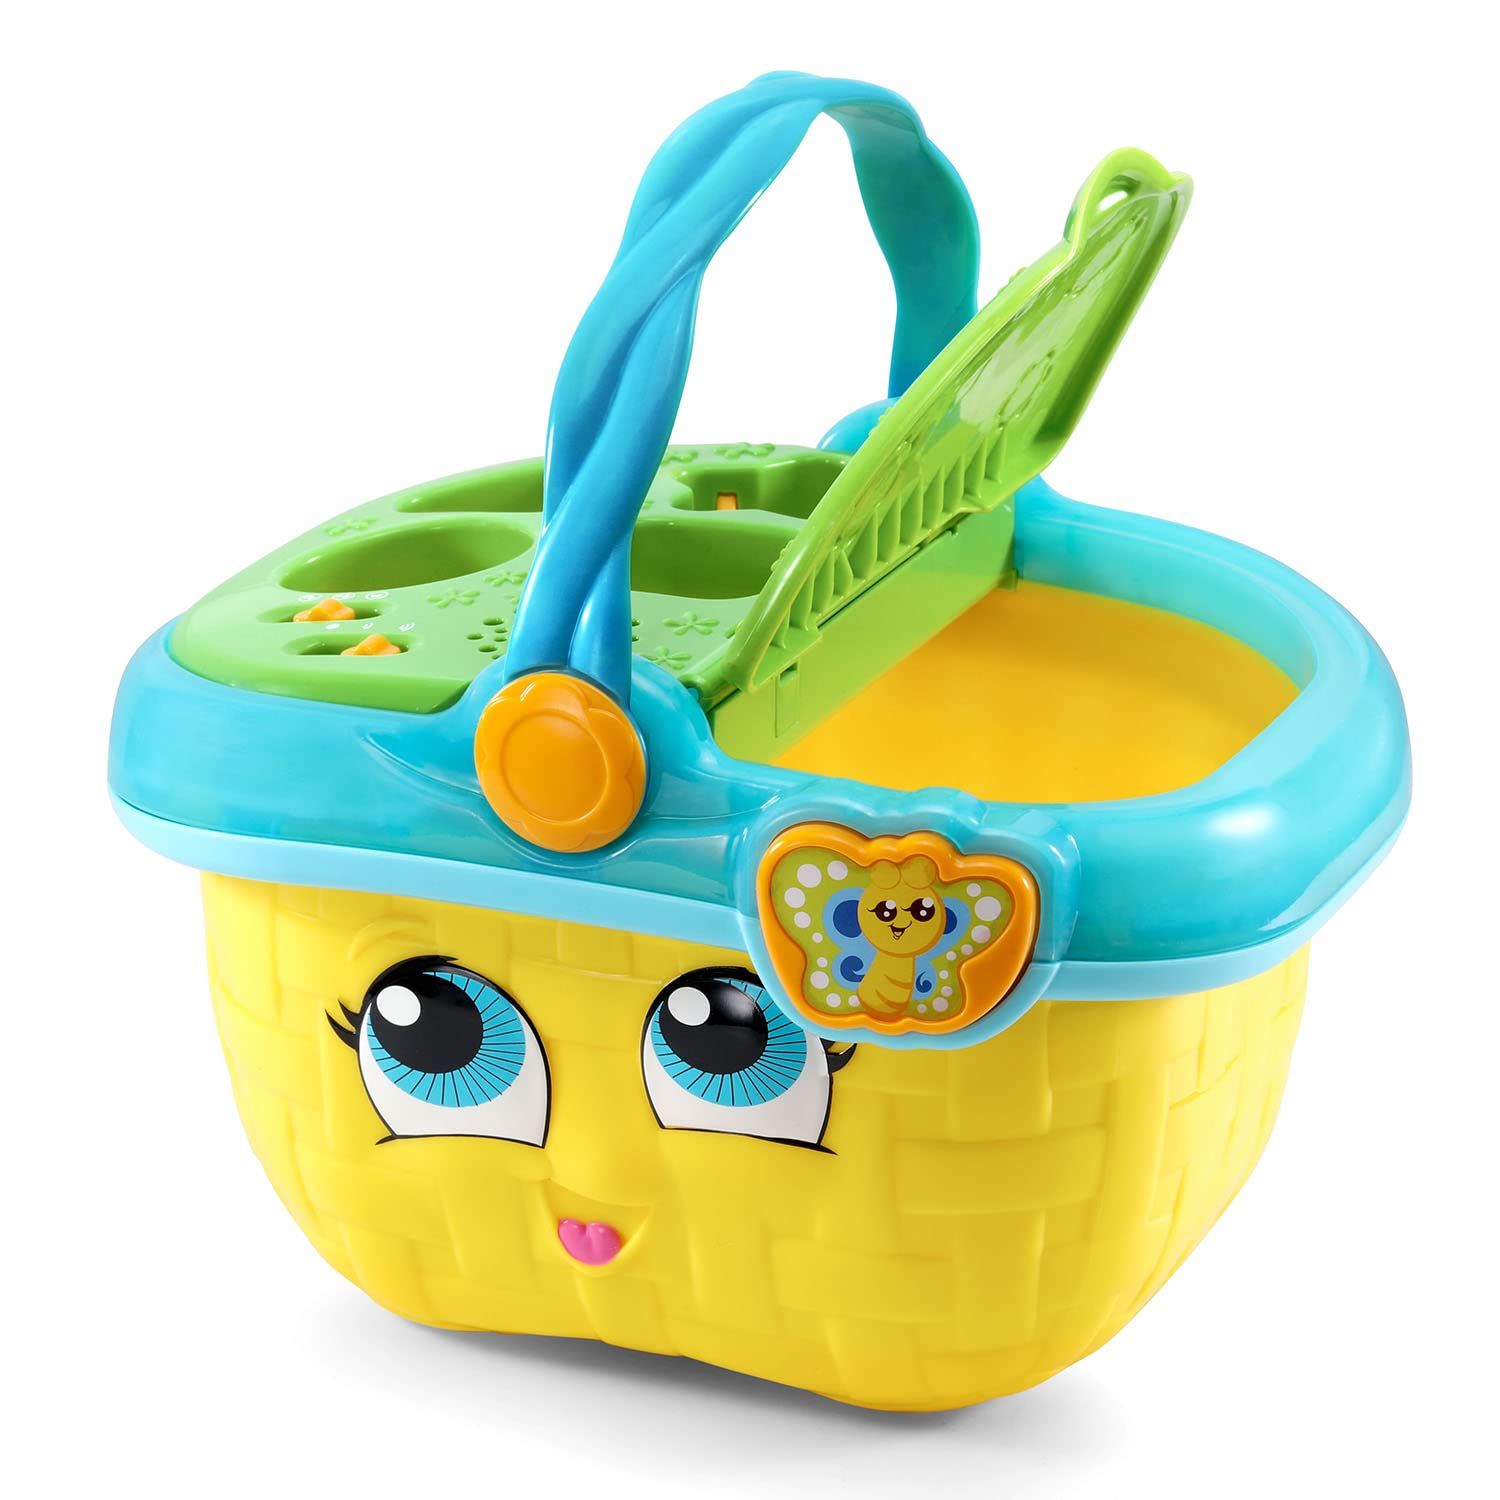 LeapFrog Shapes and Sharing Picnic Basket (Frustration Free Packaging), Yellow